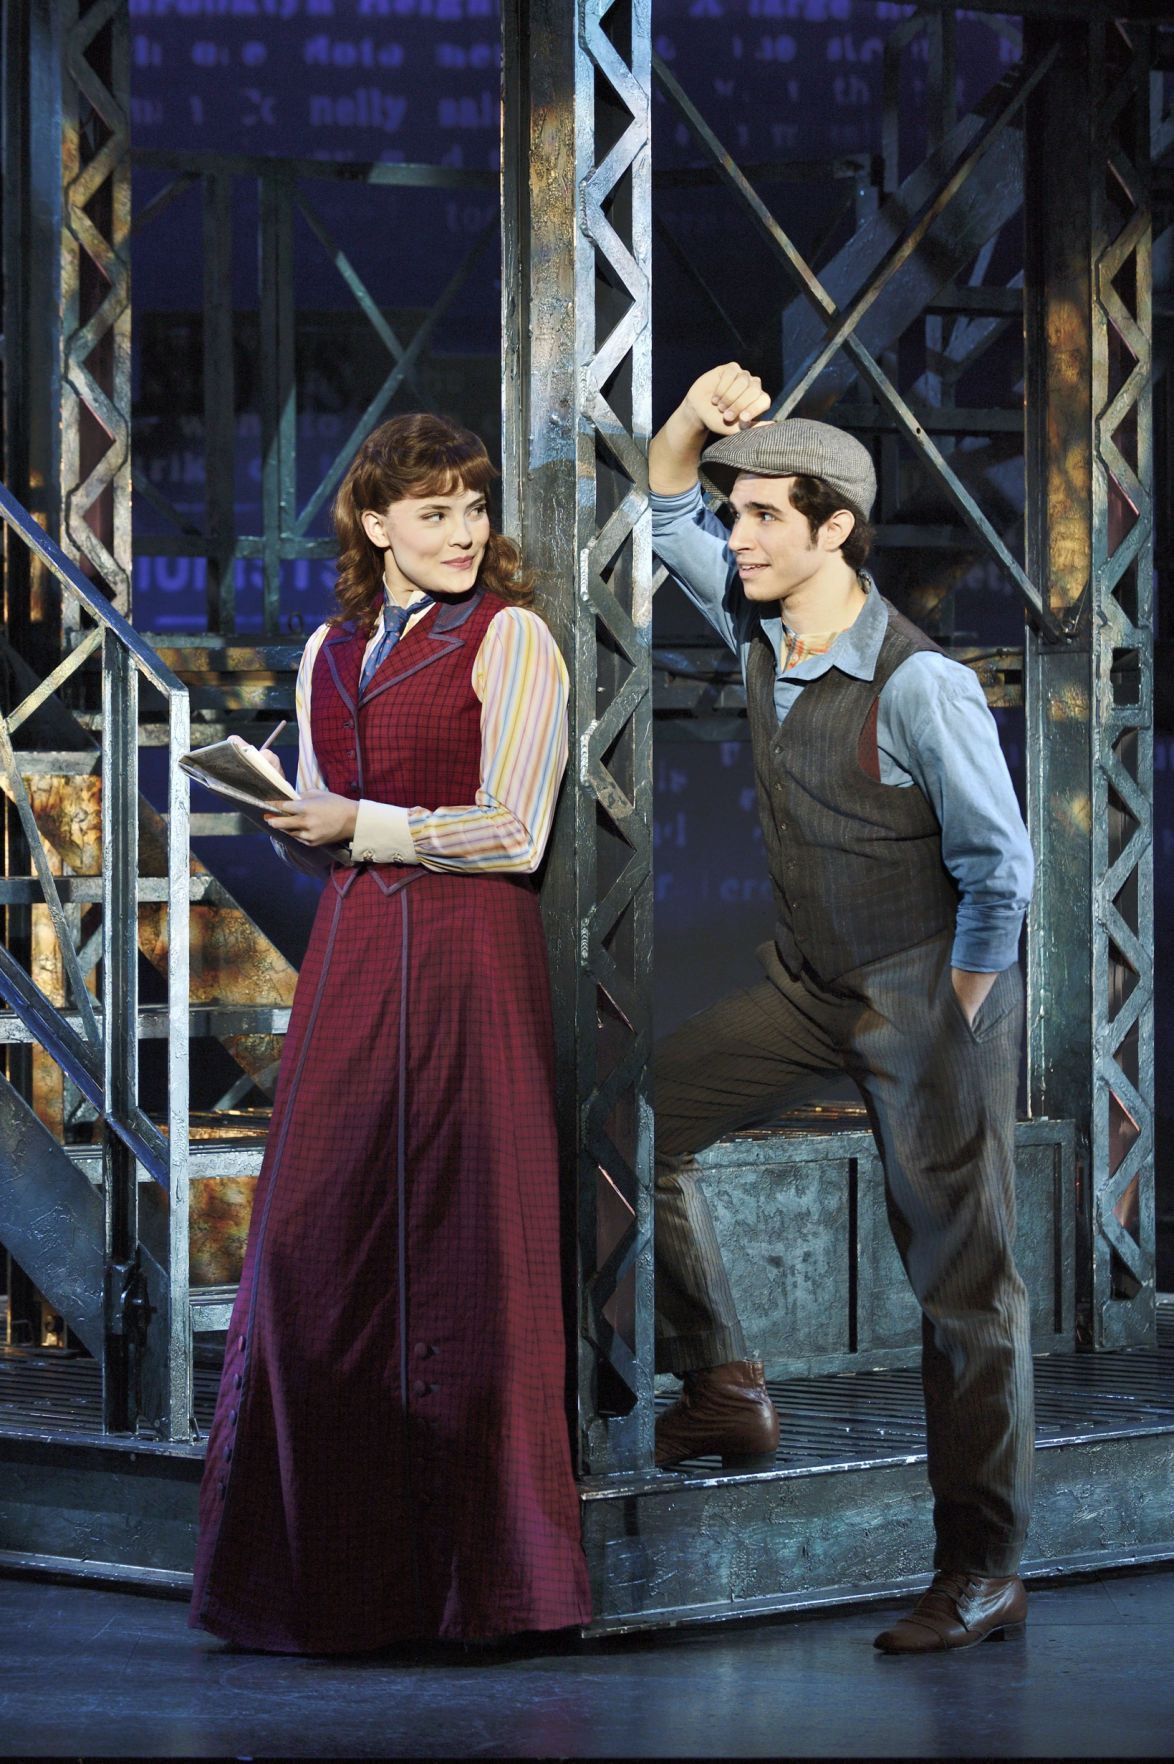 Pulitzer Surprise How Newsies Evolved From Film Flop To Stage Sensation Culture Club Stltoday Com